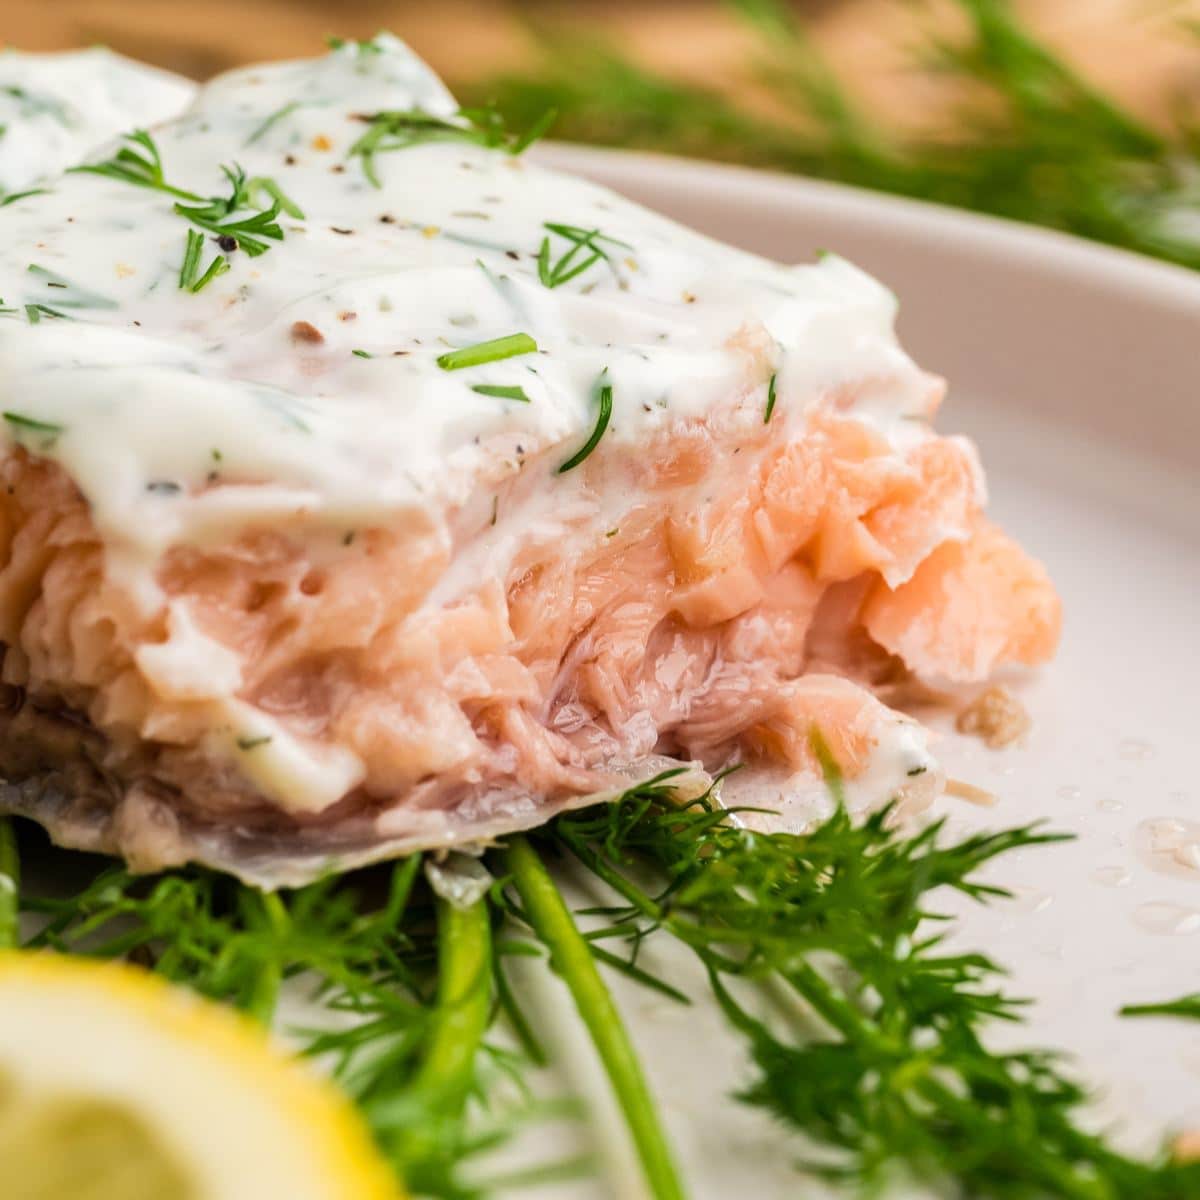 Sous vide salmon with dill sauce on plate.